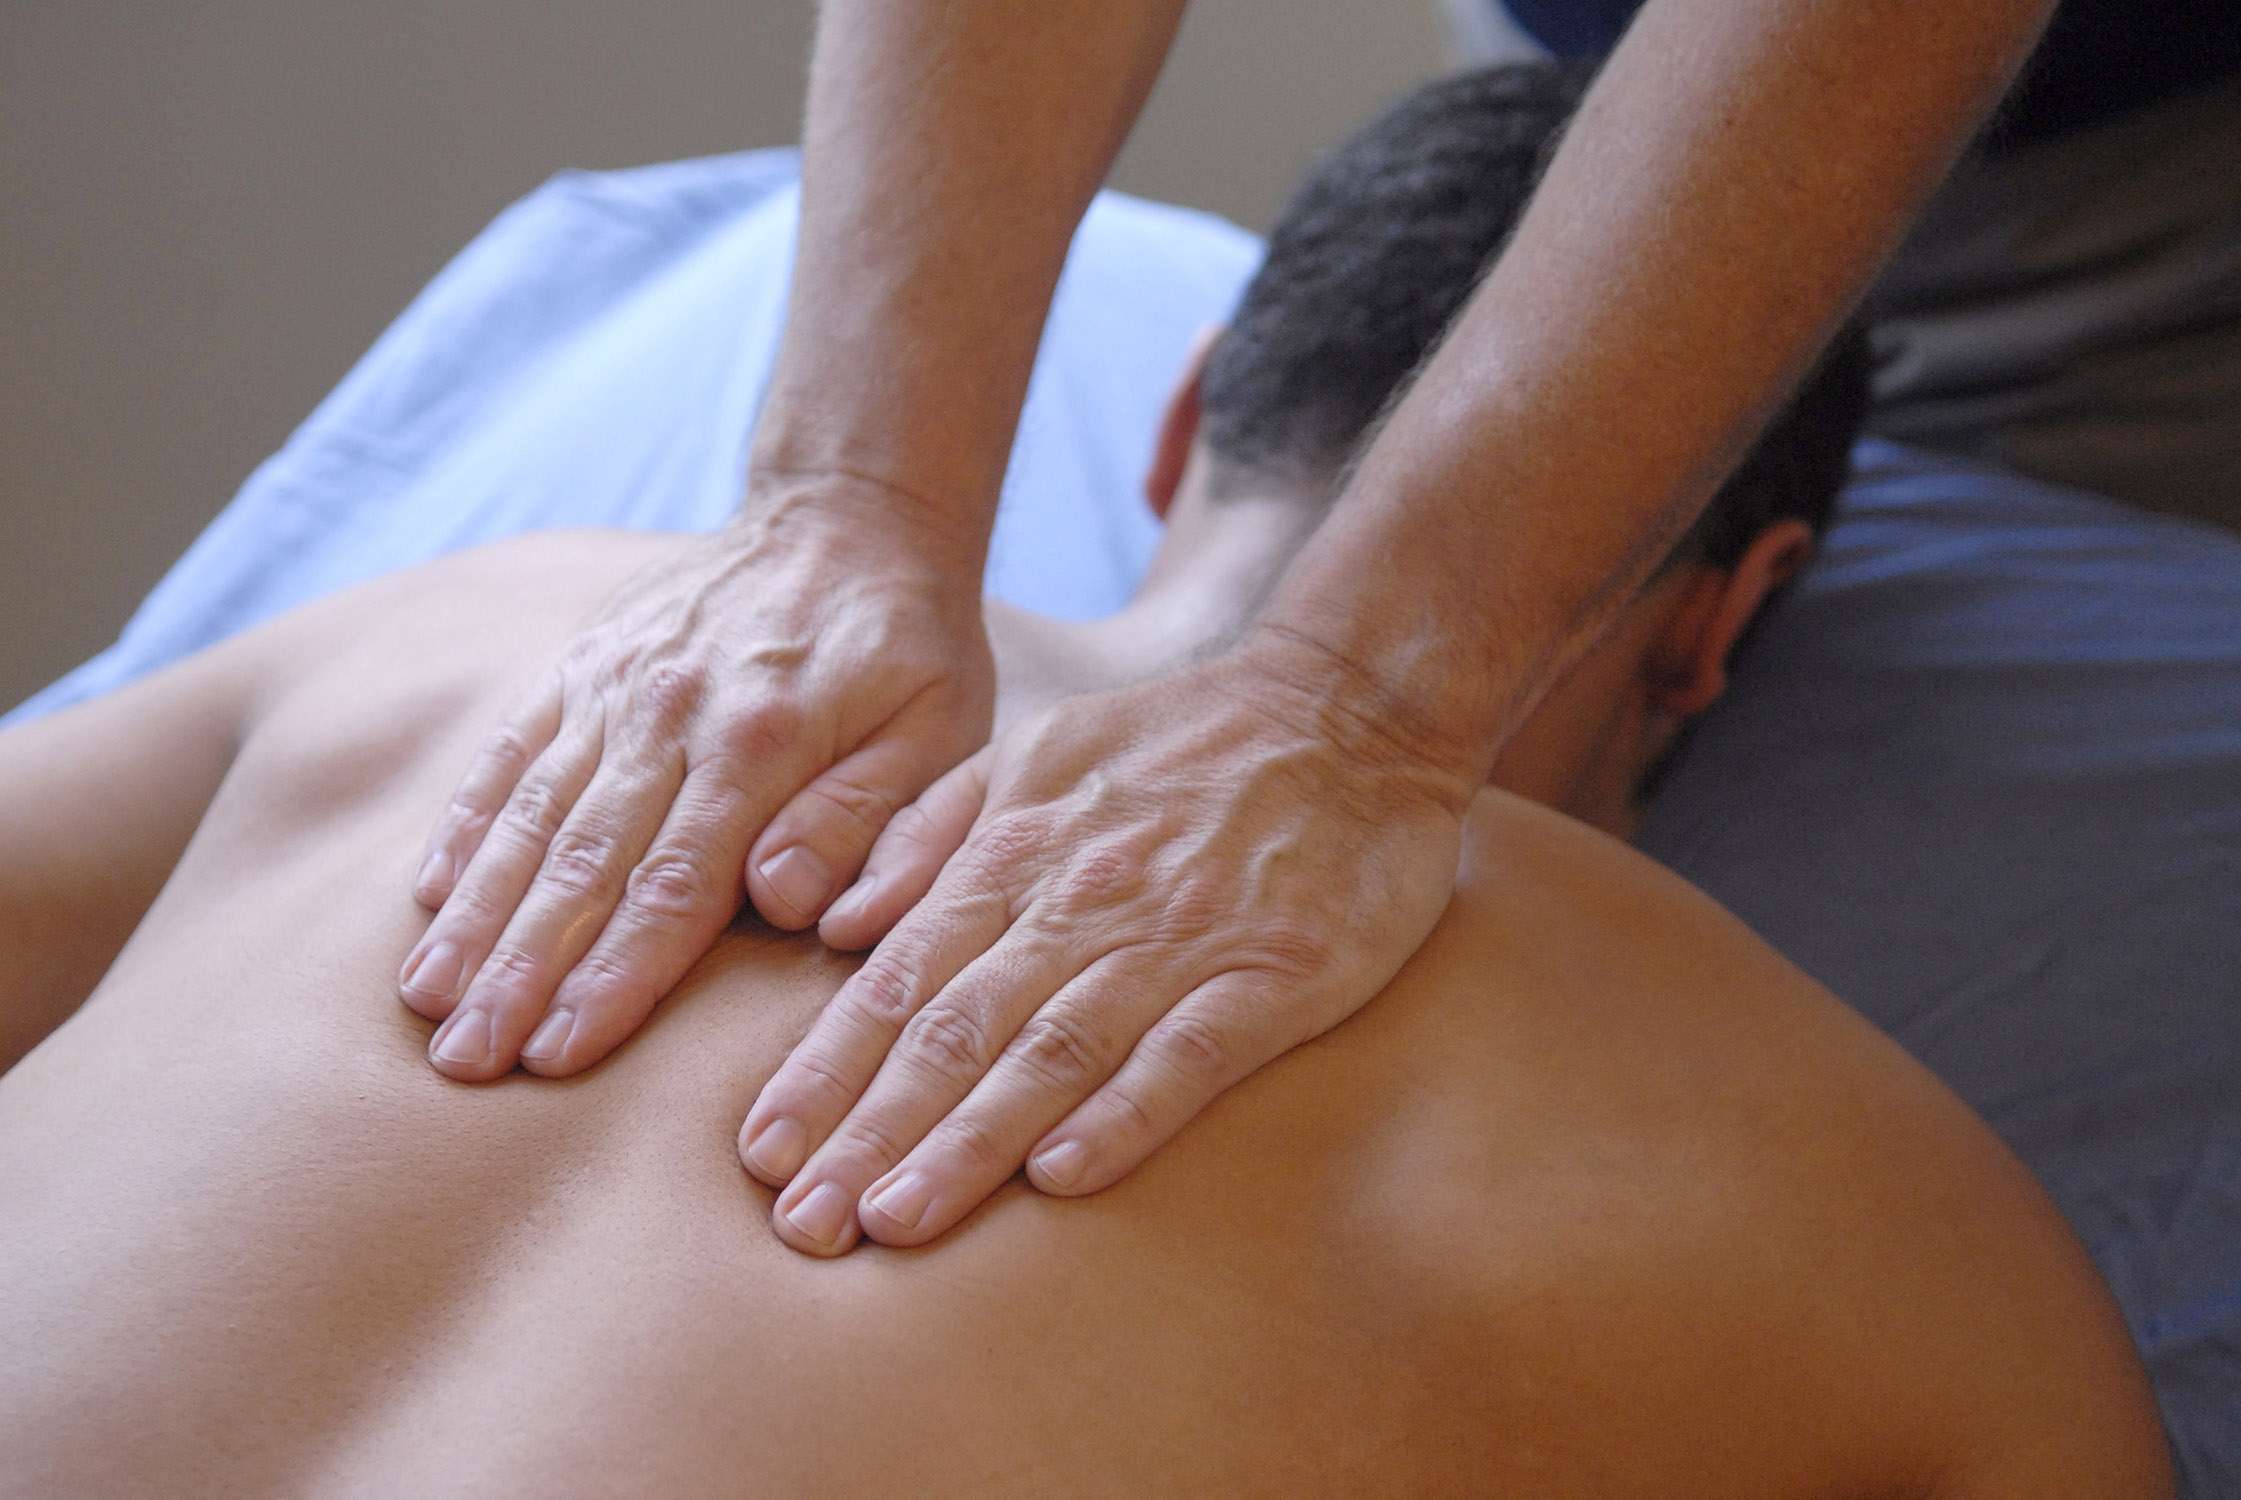 Massage Therapy: What You Need To Know